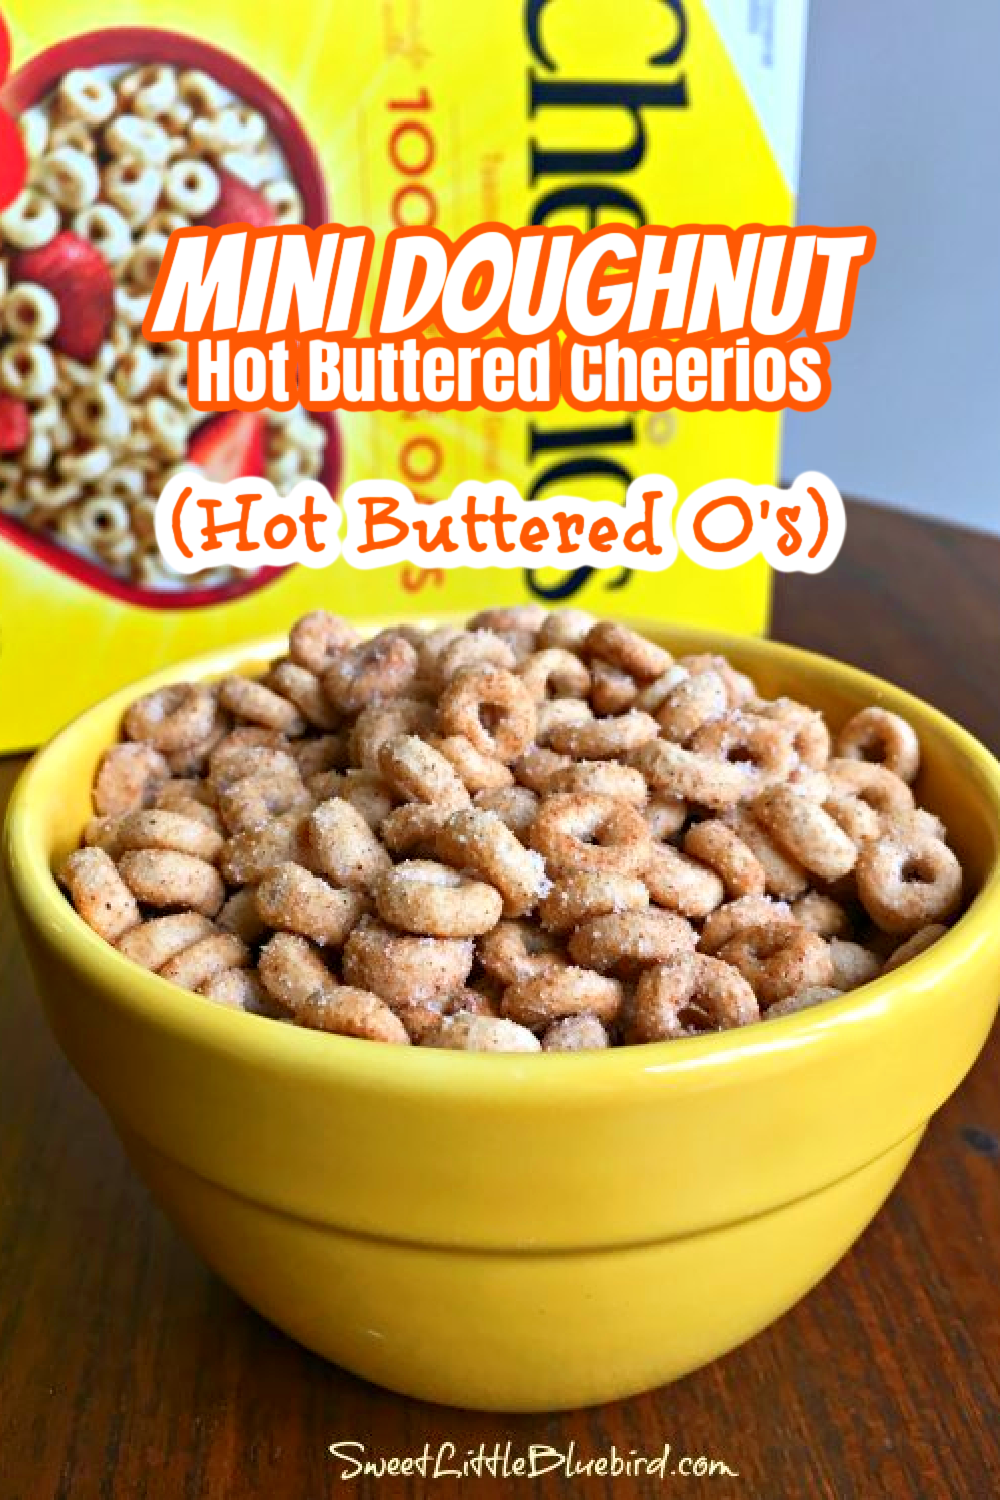 This is a photo of Mini Doughnut Hot Buttered Cheerios served in a yellow bowl with a box of Cheerios in the background.